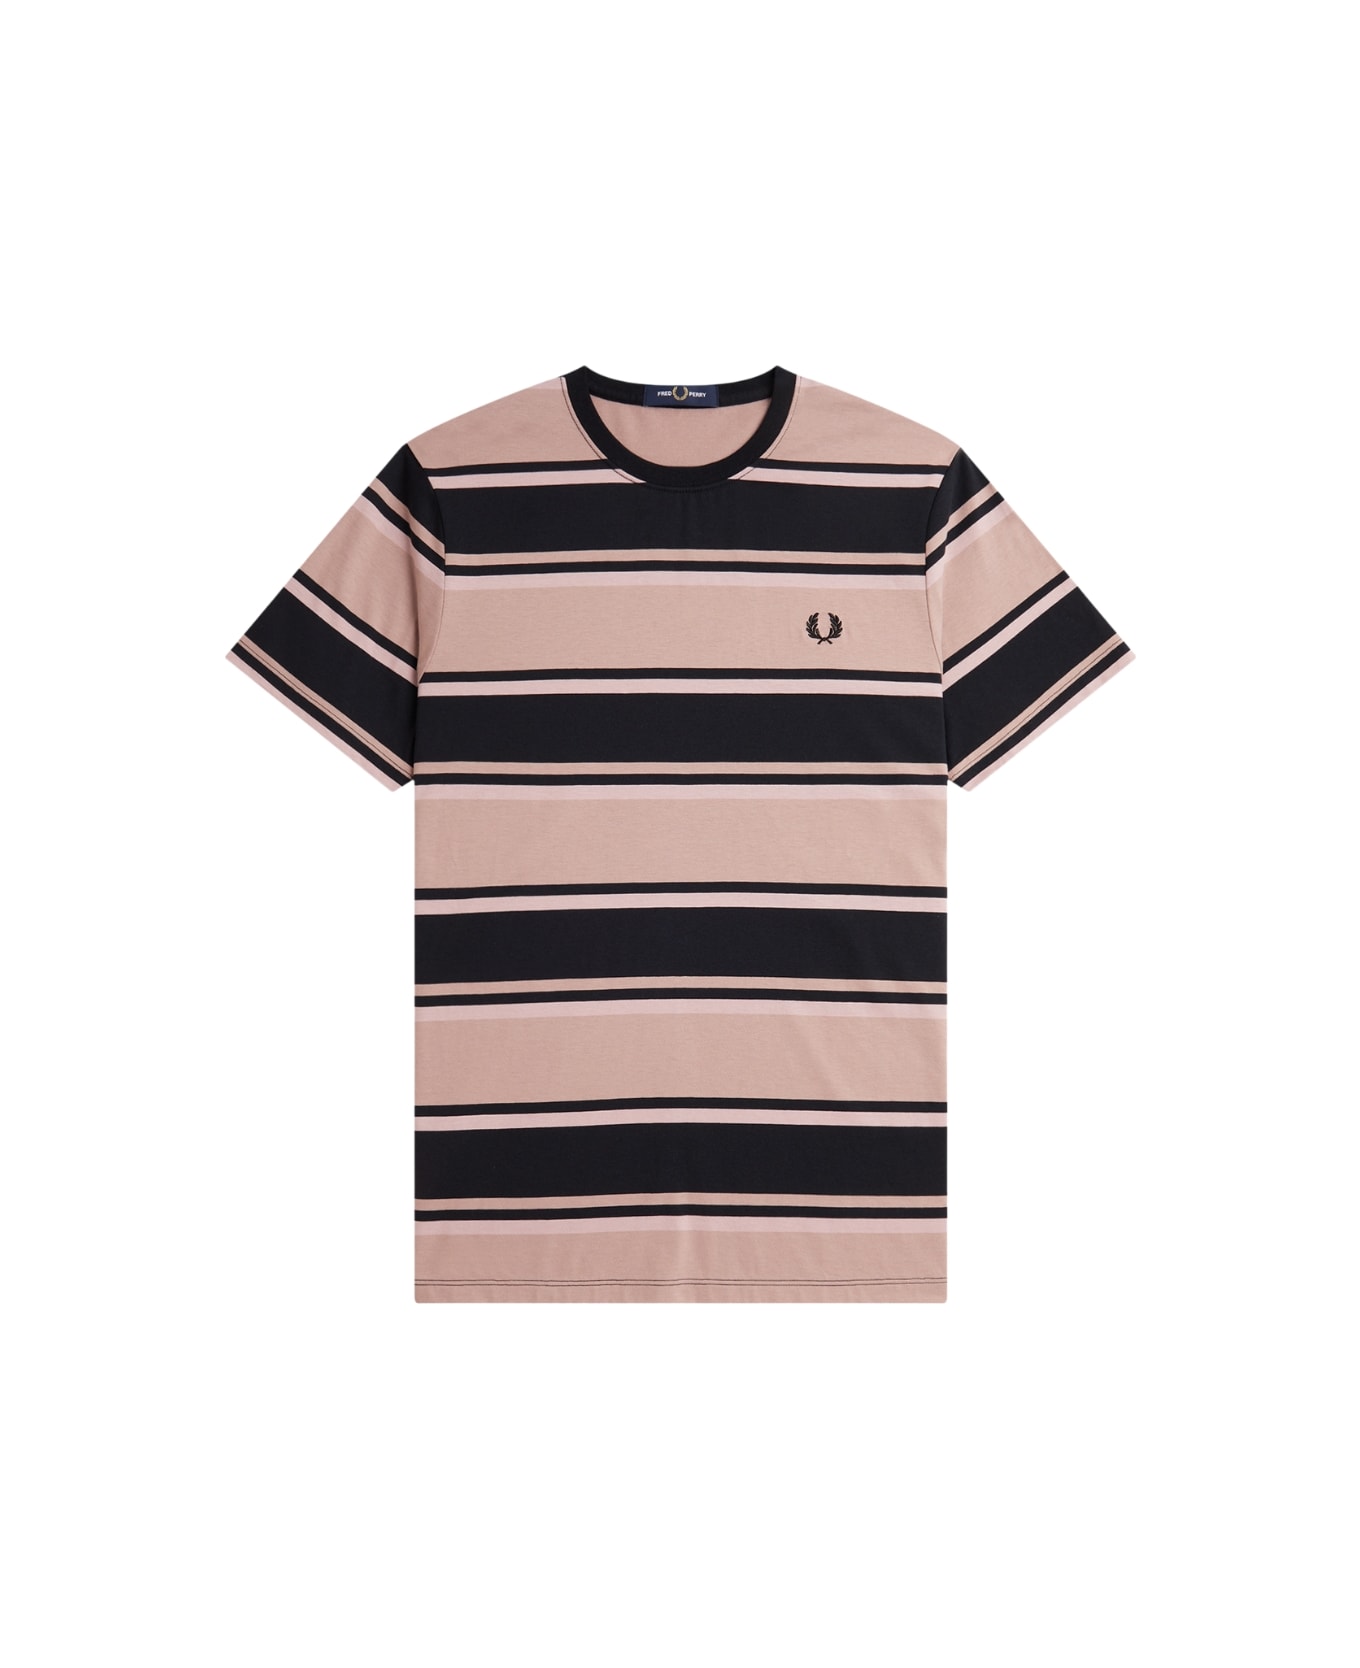 Fred Perry Fp Bold Stripe T-shirt - Dkpink Dustro Bk